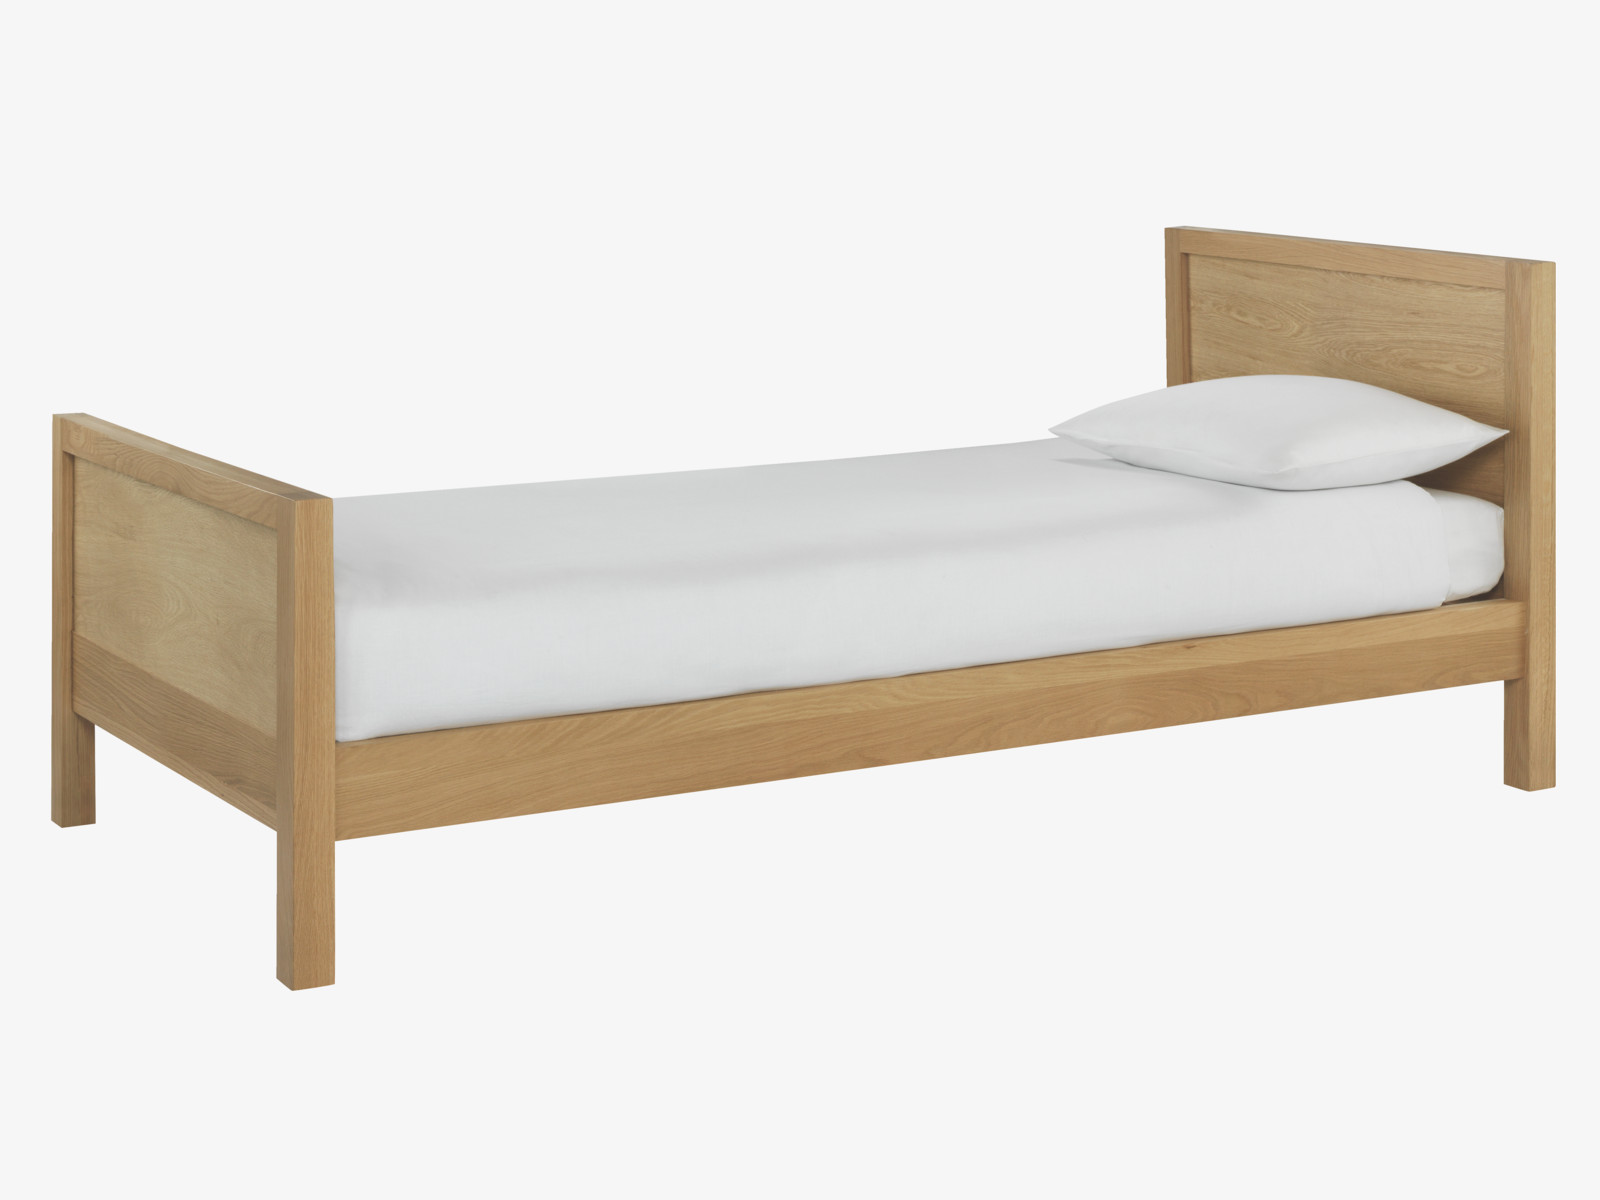 child single bed size